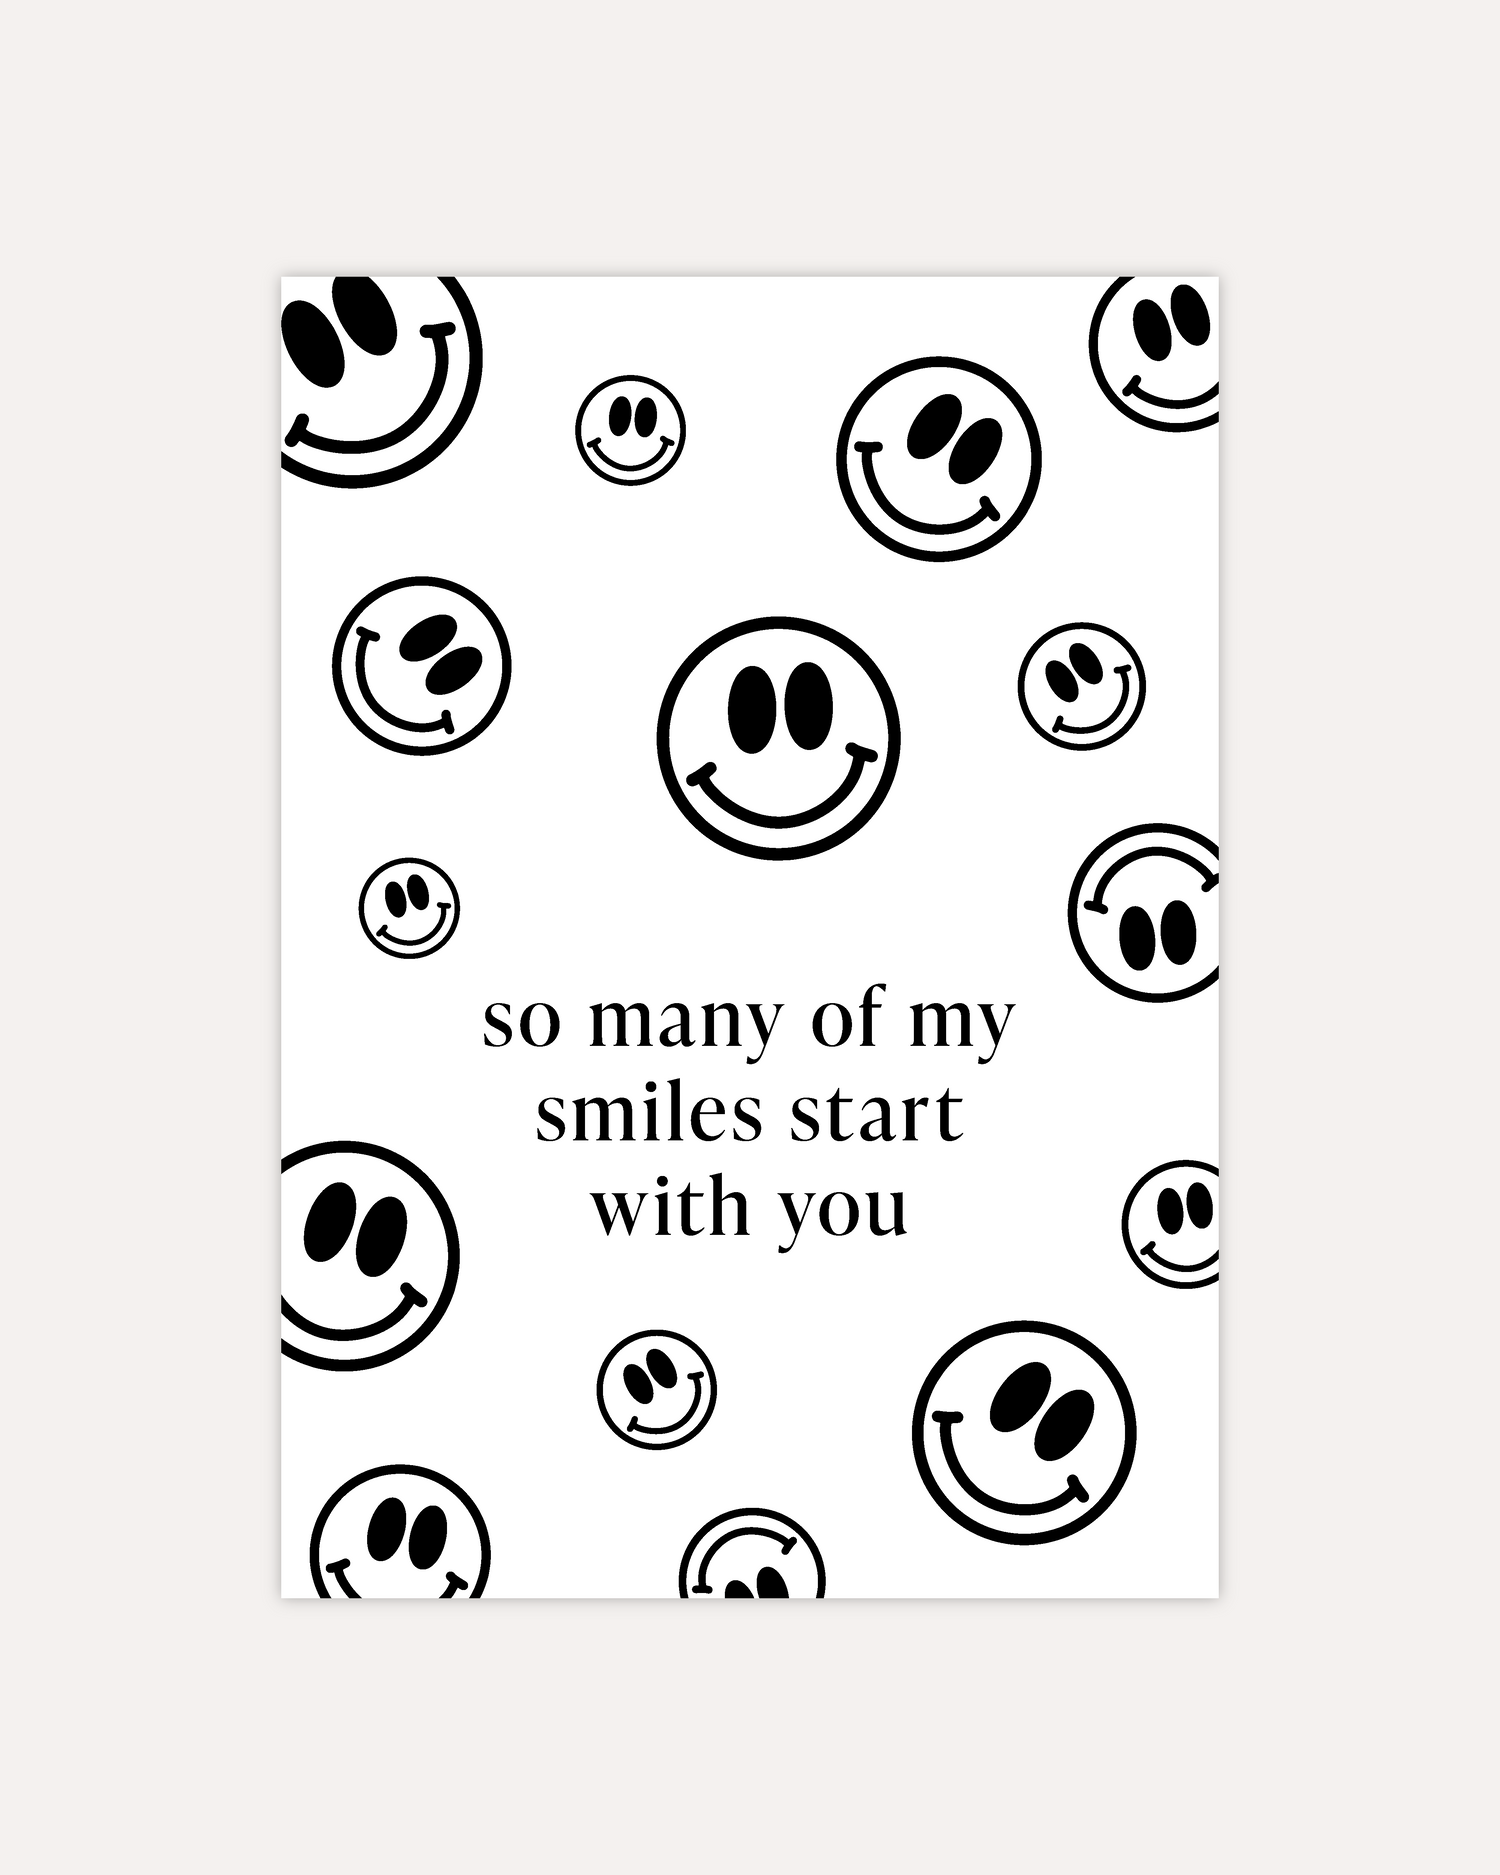 A postcard design consisting of many smiley faces in varying sizes and directions and some text in the middle saying &quot;so many of my smiles start with you&quot;. The design is shown on a beige background.